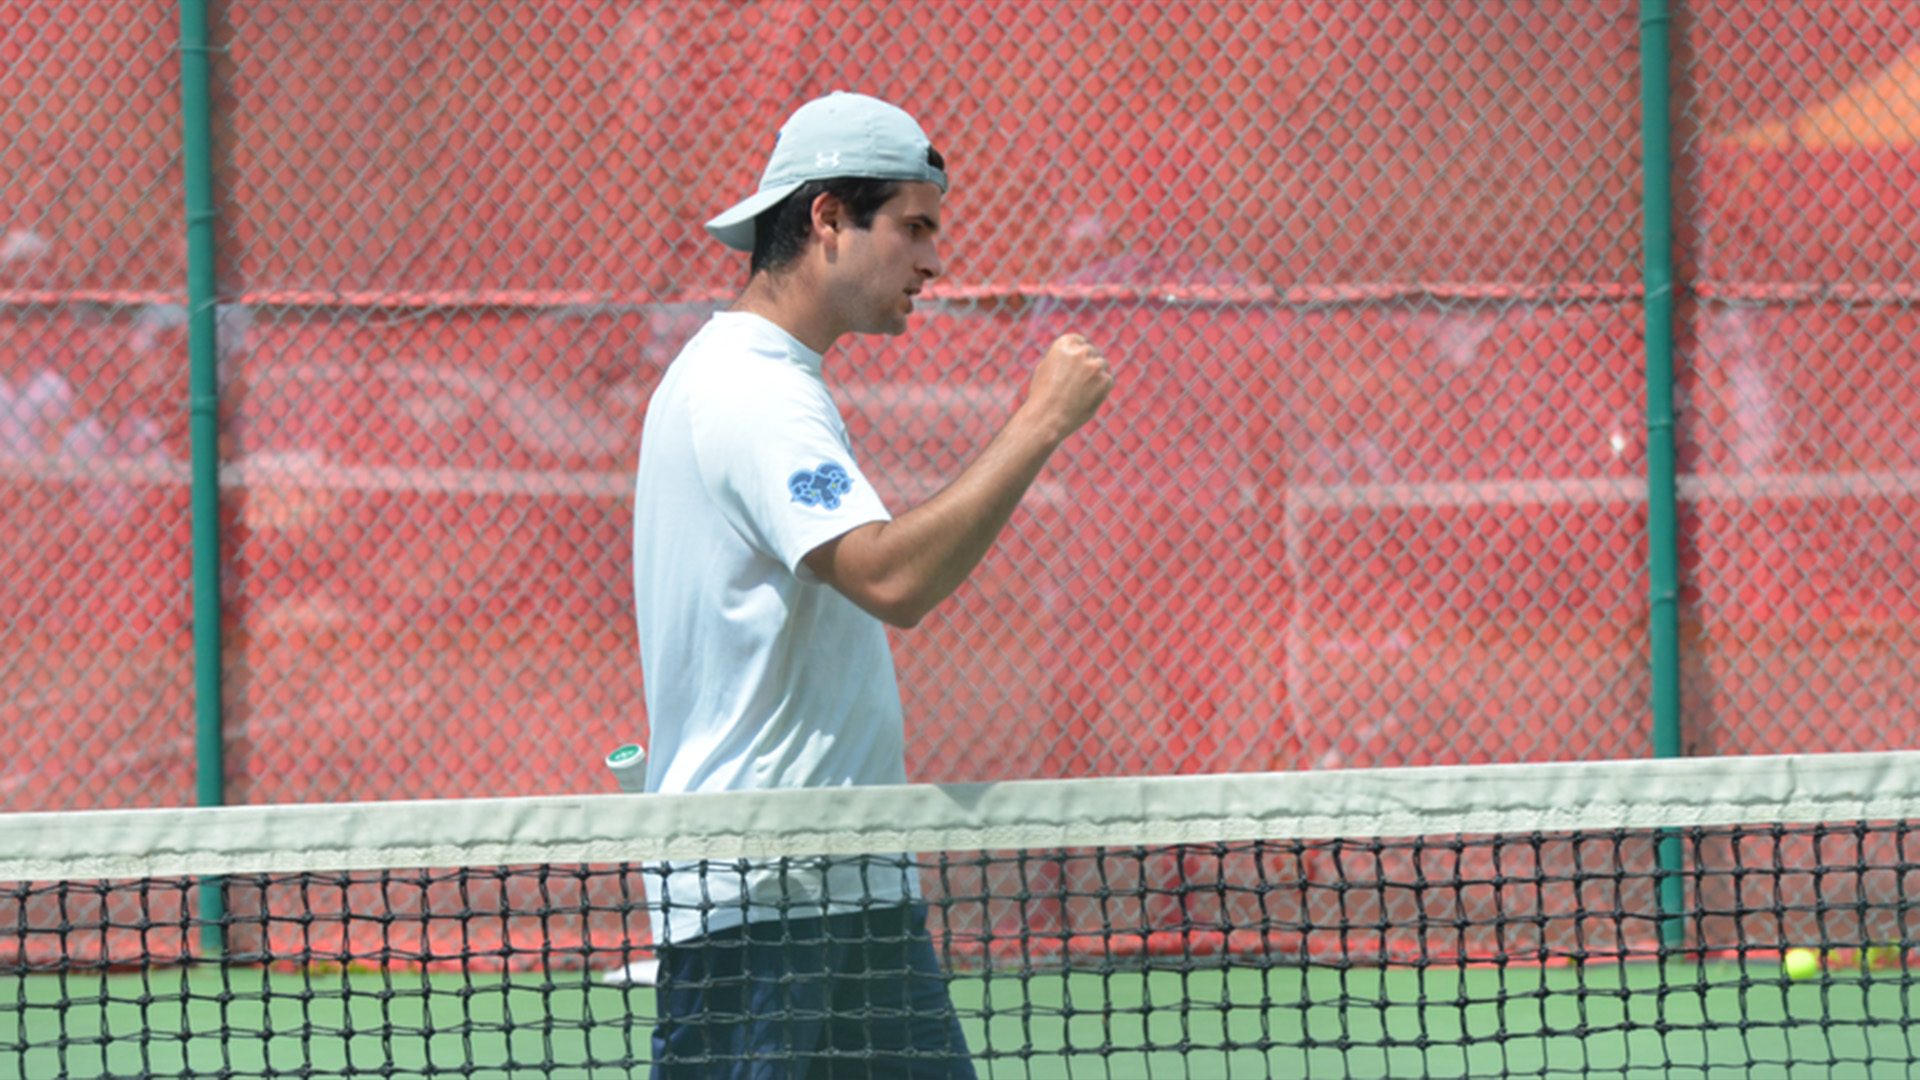 Jefferson MTEN Picks Up NCAA Win & Advances to Round of 16 at D2 Festival